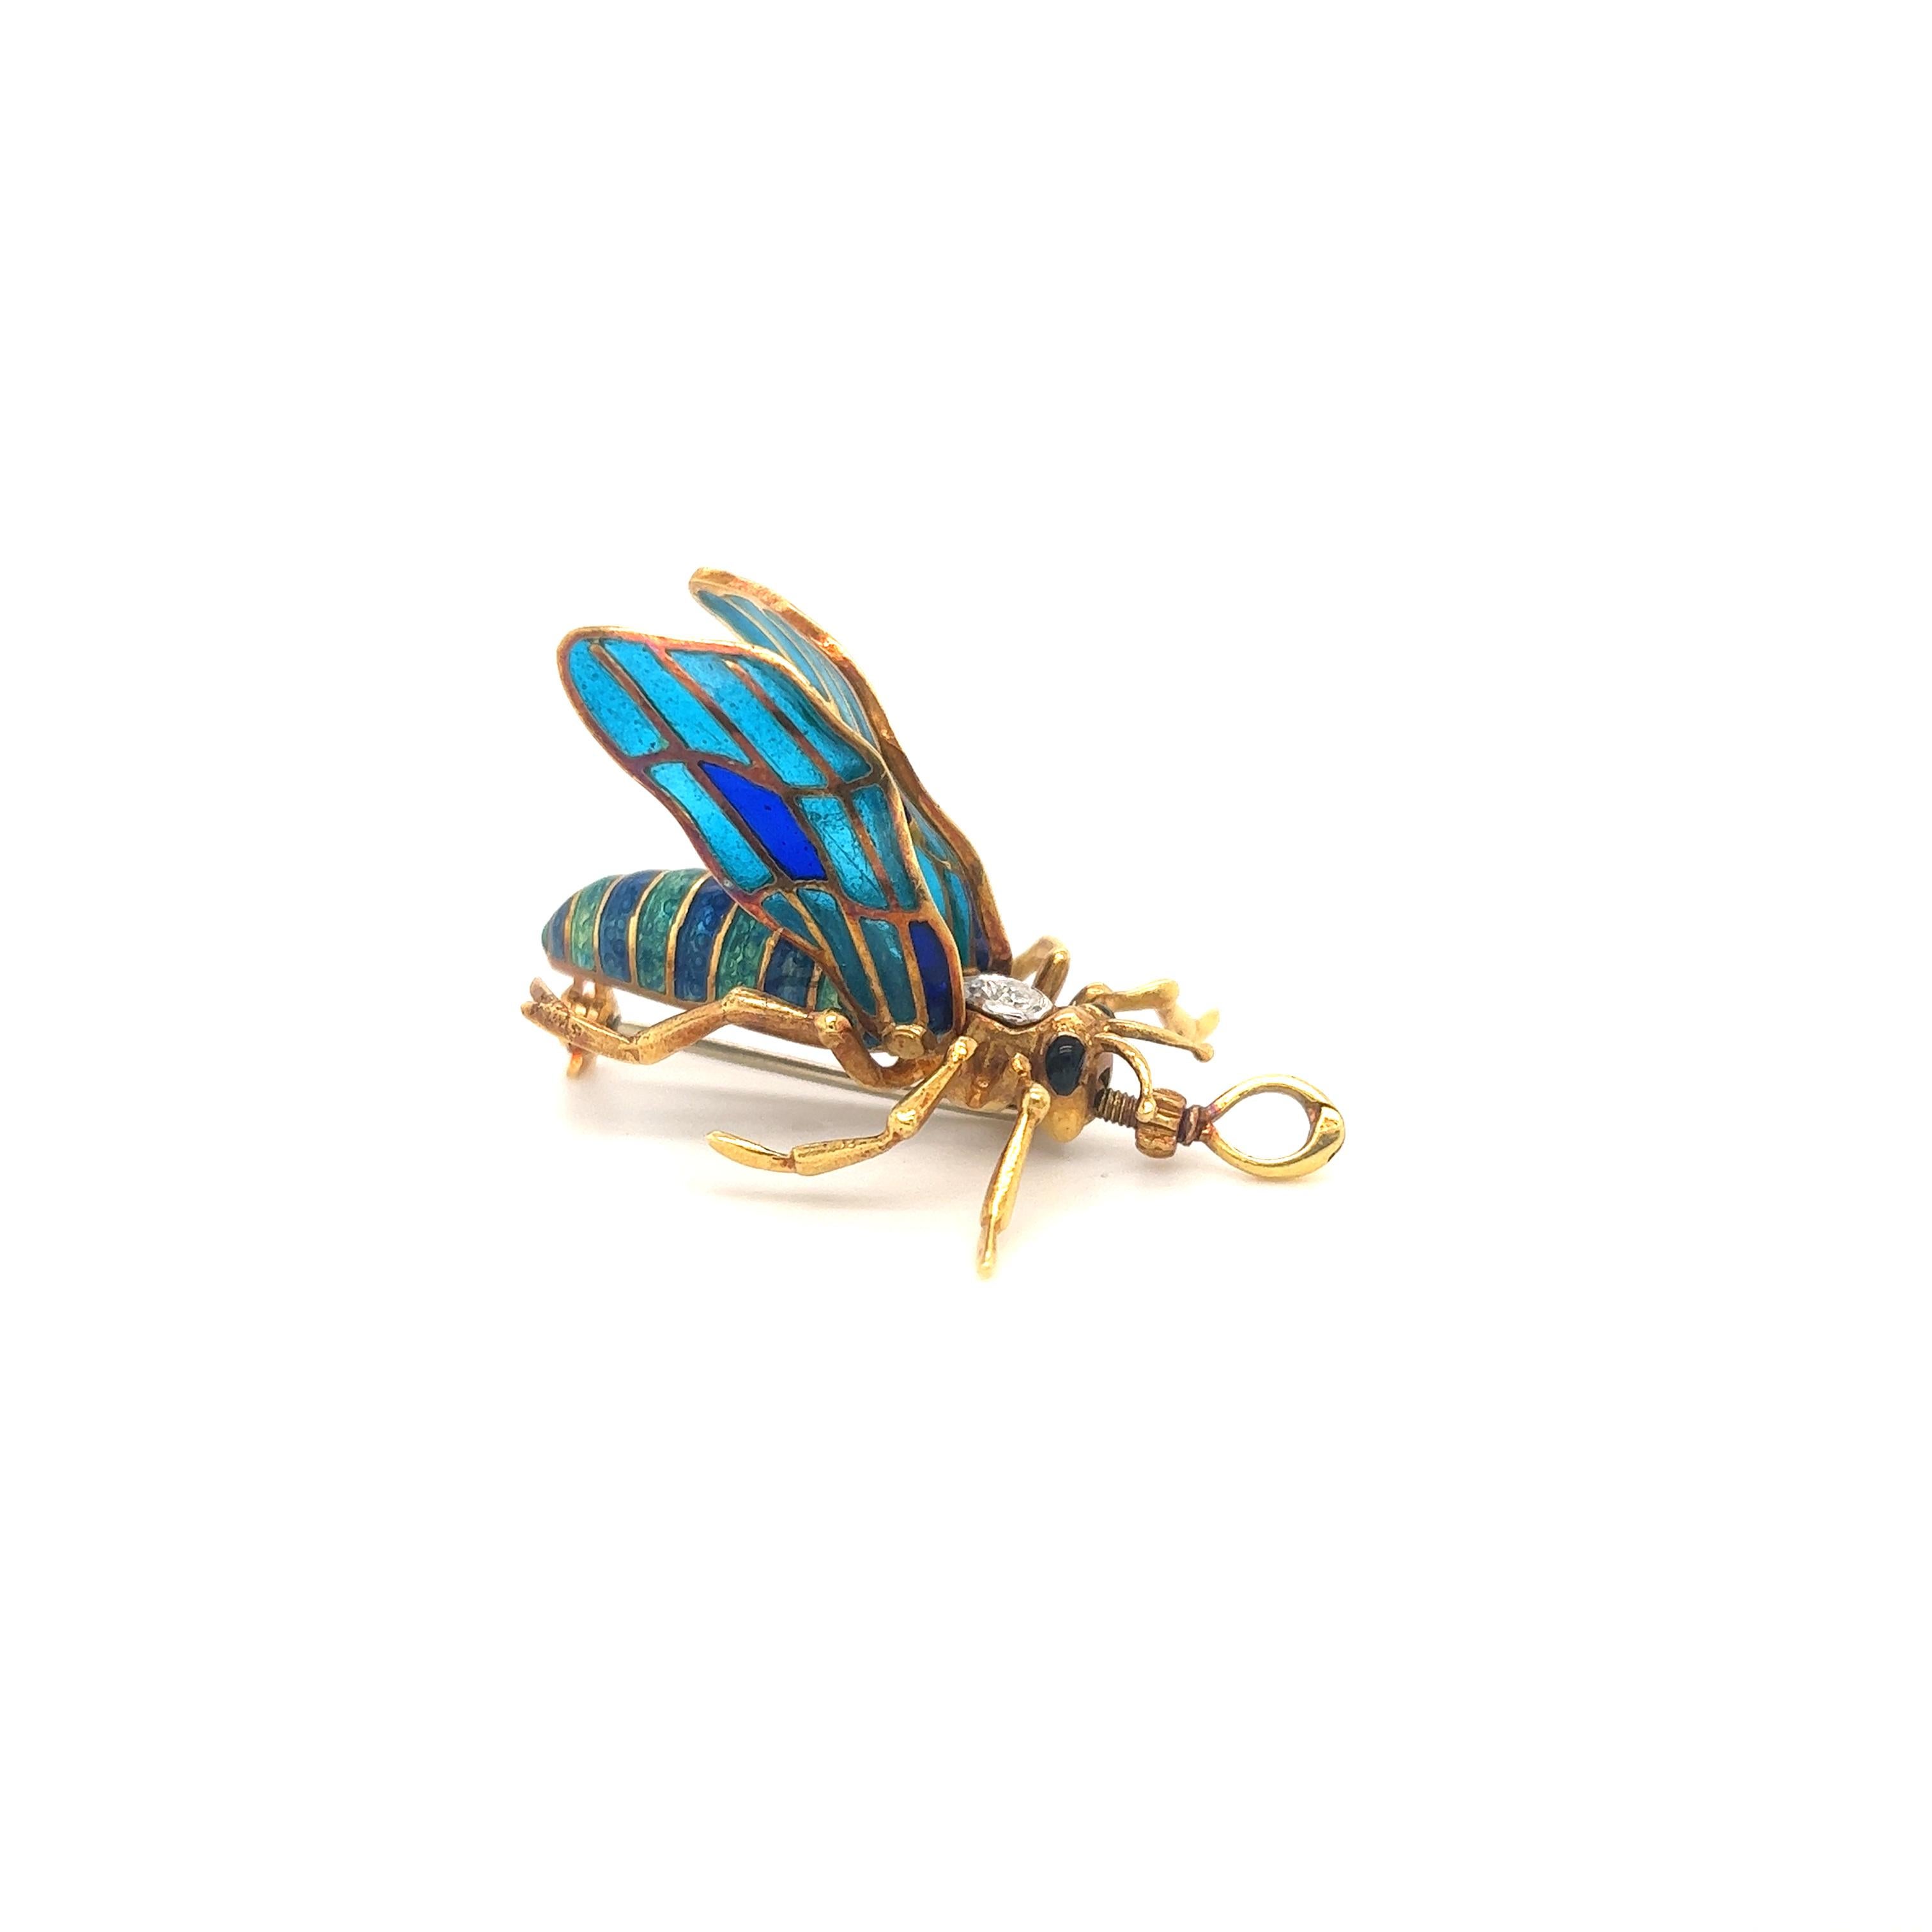 Beautiful design crafted in 18k yellow gold. The piece is a grasshopper with vibrant shades of green and blue guilloche enamel that decorate the body of the critter.  Details are endless as this little grasshopper looks extremely life like. The wing